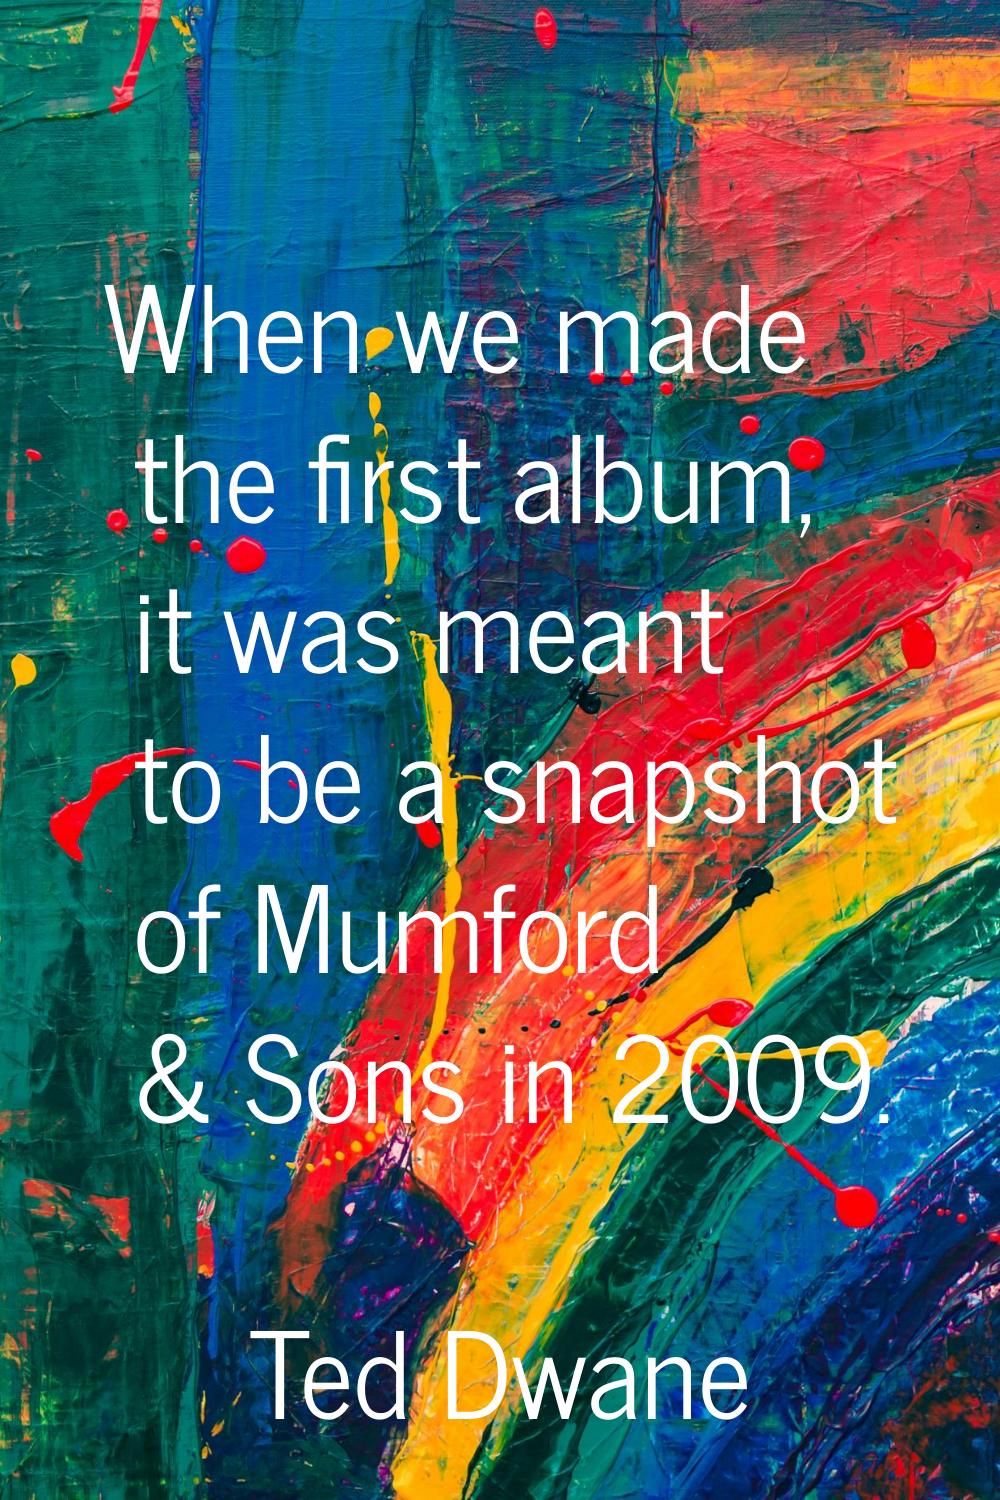 When we made the first album, it was meant to be a snapshot of Mumford & Sons in 2009.